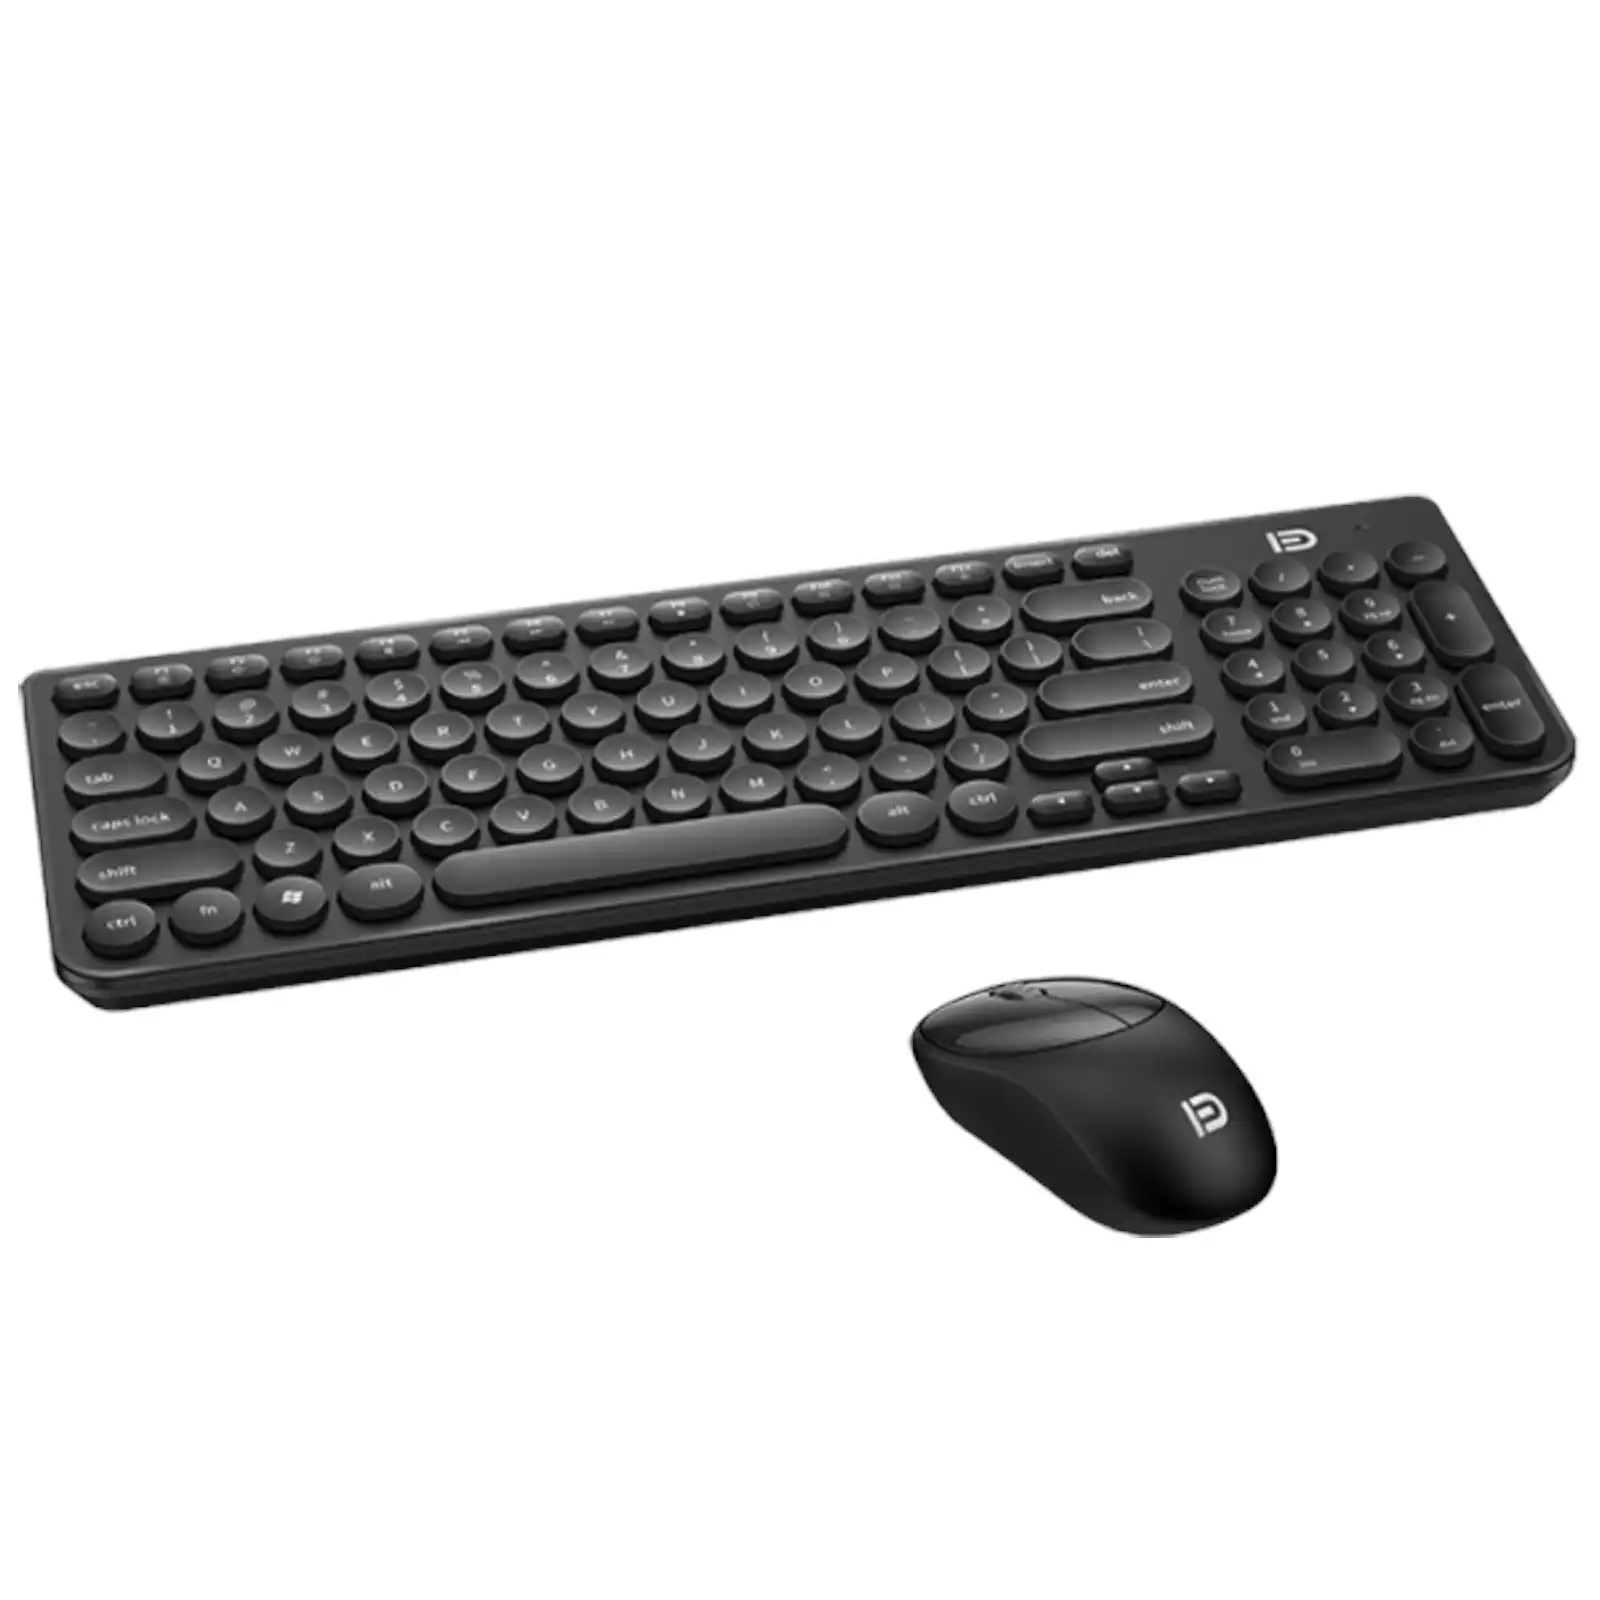 TODO 2.4Ghz Wireless Keyboard Mouse Combo Mac Windows Android 96 Key - Black